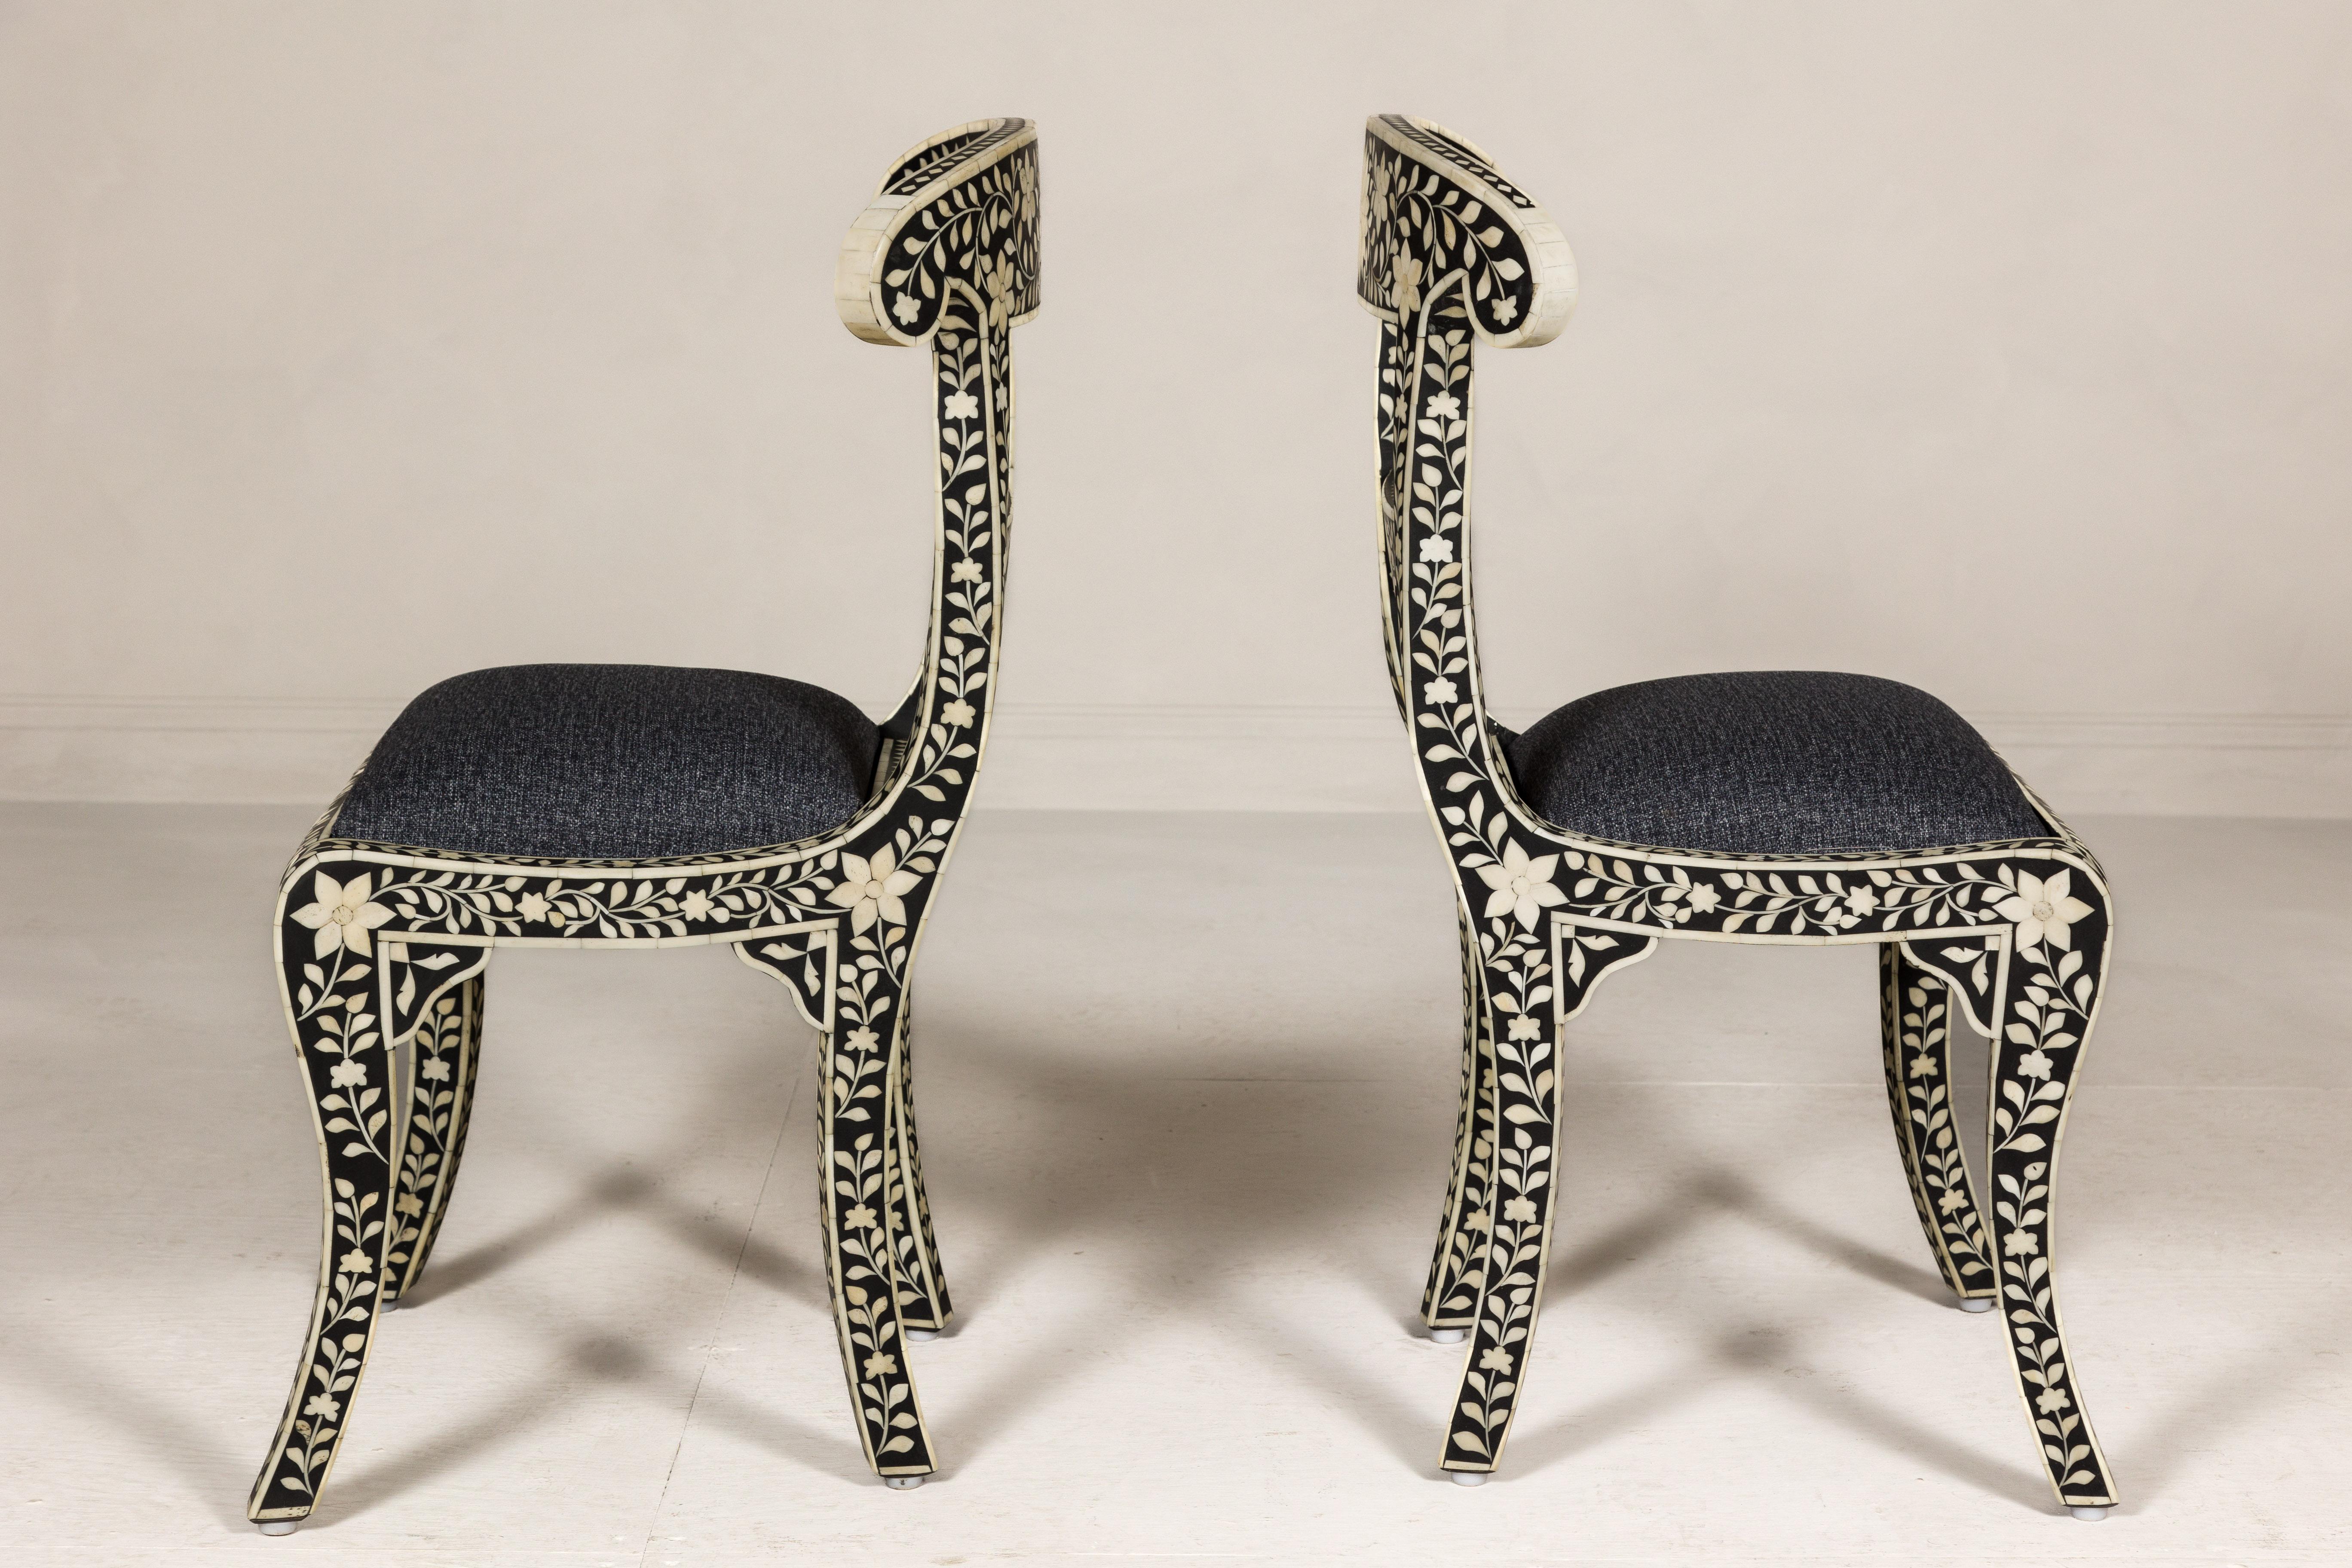 Anglo-Indian Style Ebonized Side Chairs with Floral Themed Bone Inlay, a Pair For Sale 7